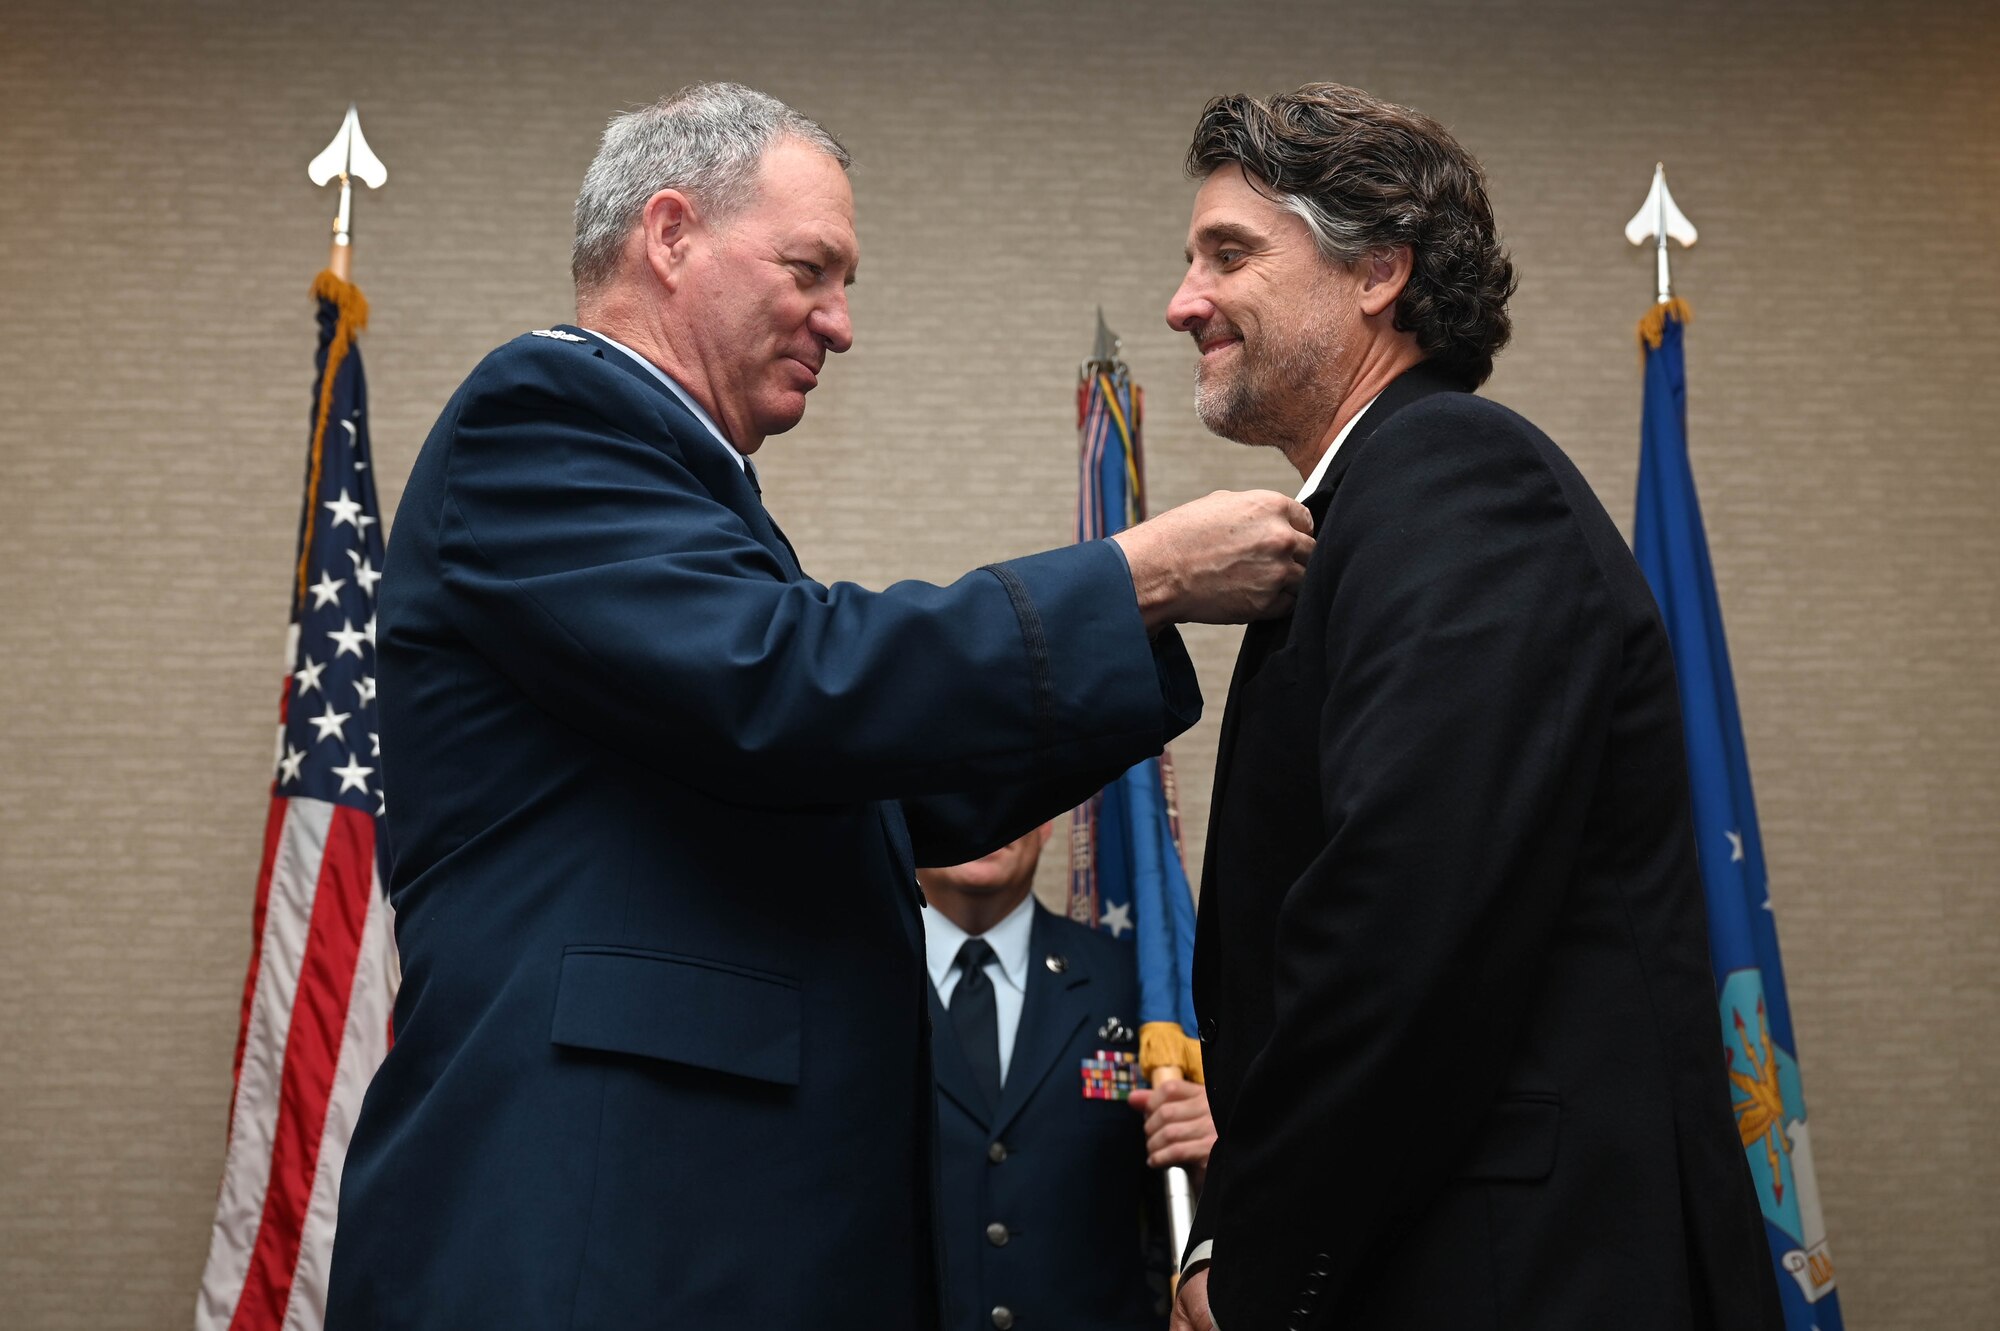 Col. Terry McClain, 433rd Airlift Wing commander, pins an Air Force commander’s insignia pin on Brad Tobler, Wish For Our Heroes chapter director and co-owner of Federal Employee Benefits, during the 433rd AW Honorary Commanders’ Induction Ceremony in San Antonio, July 9, 2022. The purpose of the Honorary Commanders’ program is to bridge the gap between the military and local community. (U.S. Air Force photo by Senior Airman Brittany Wich)